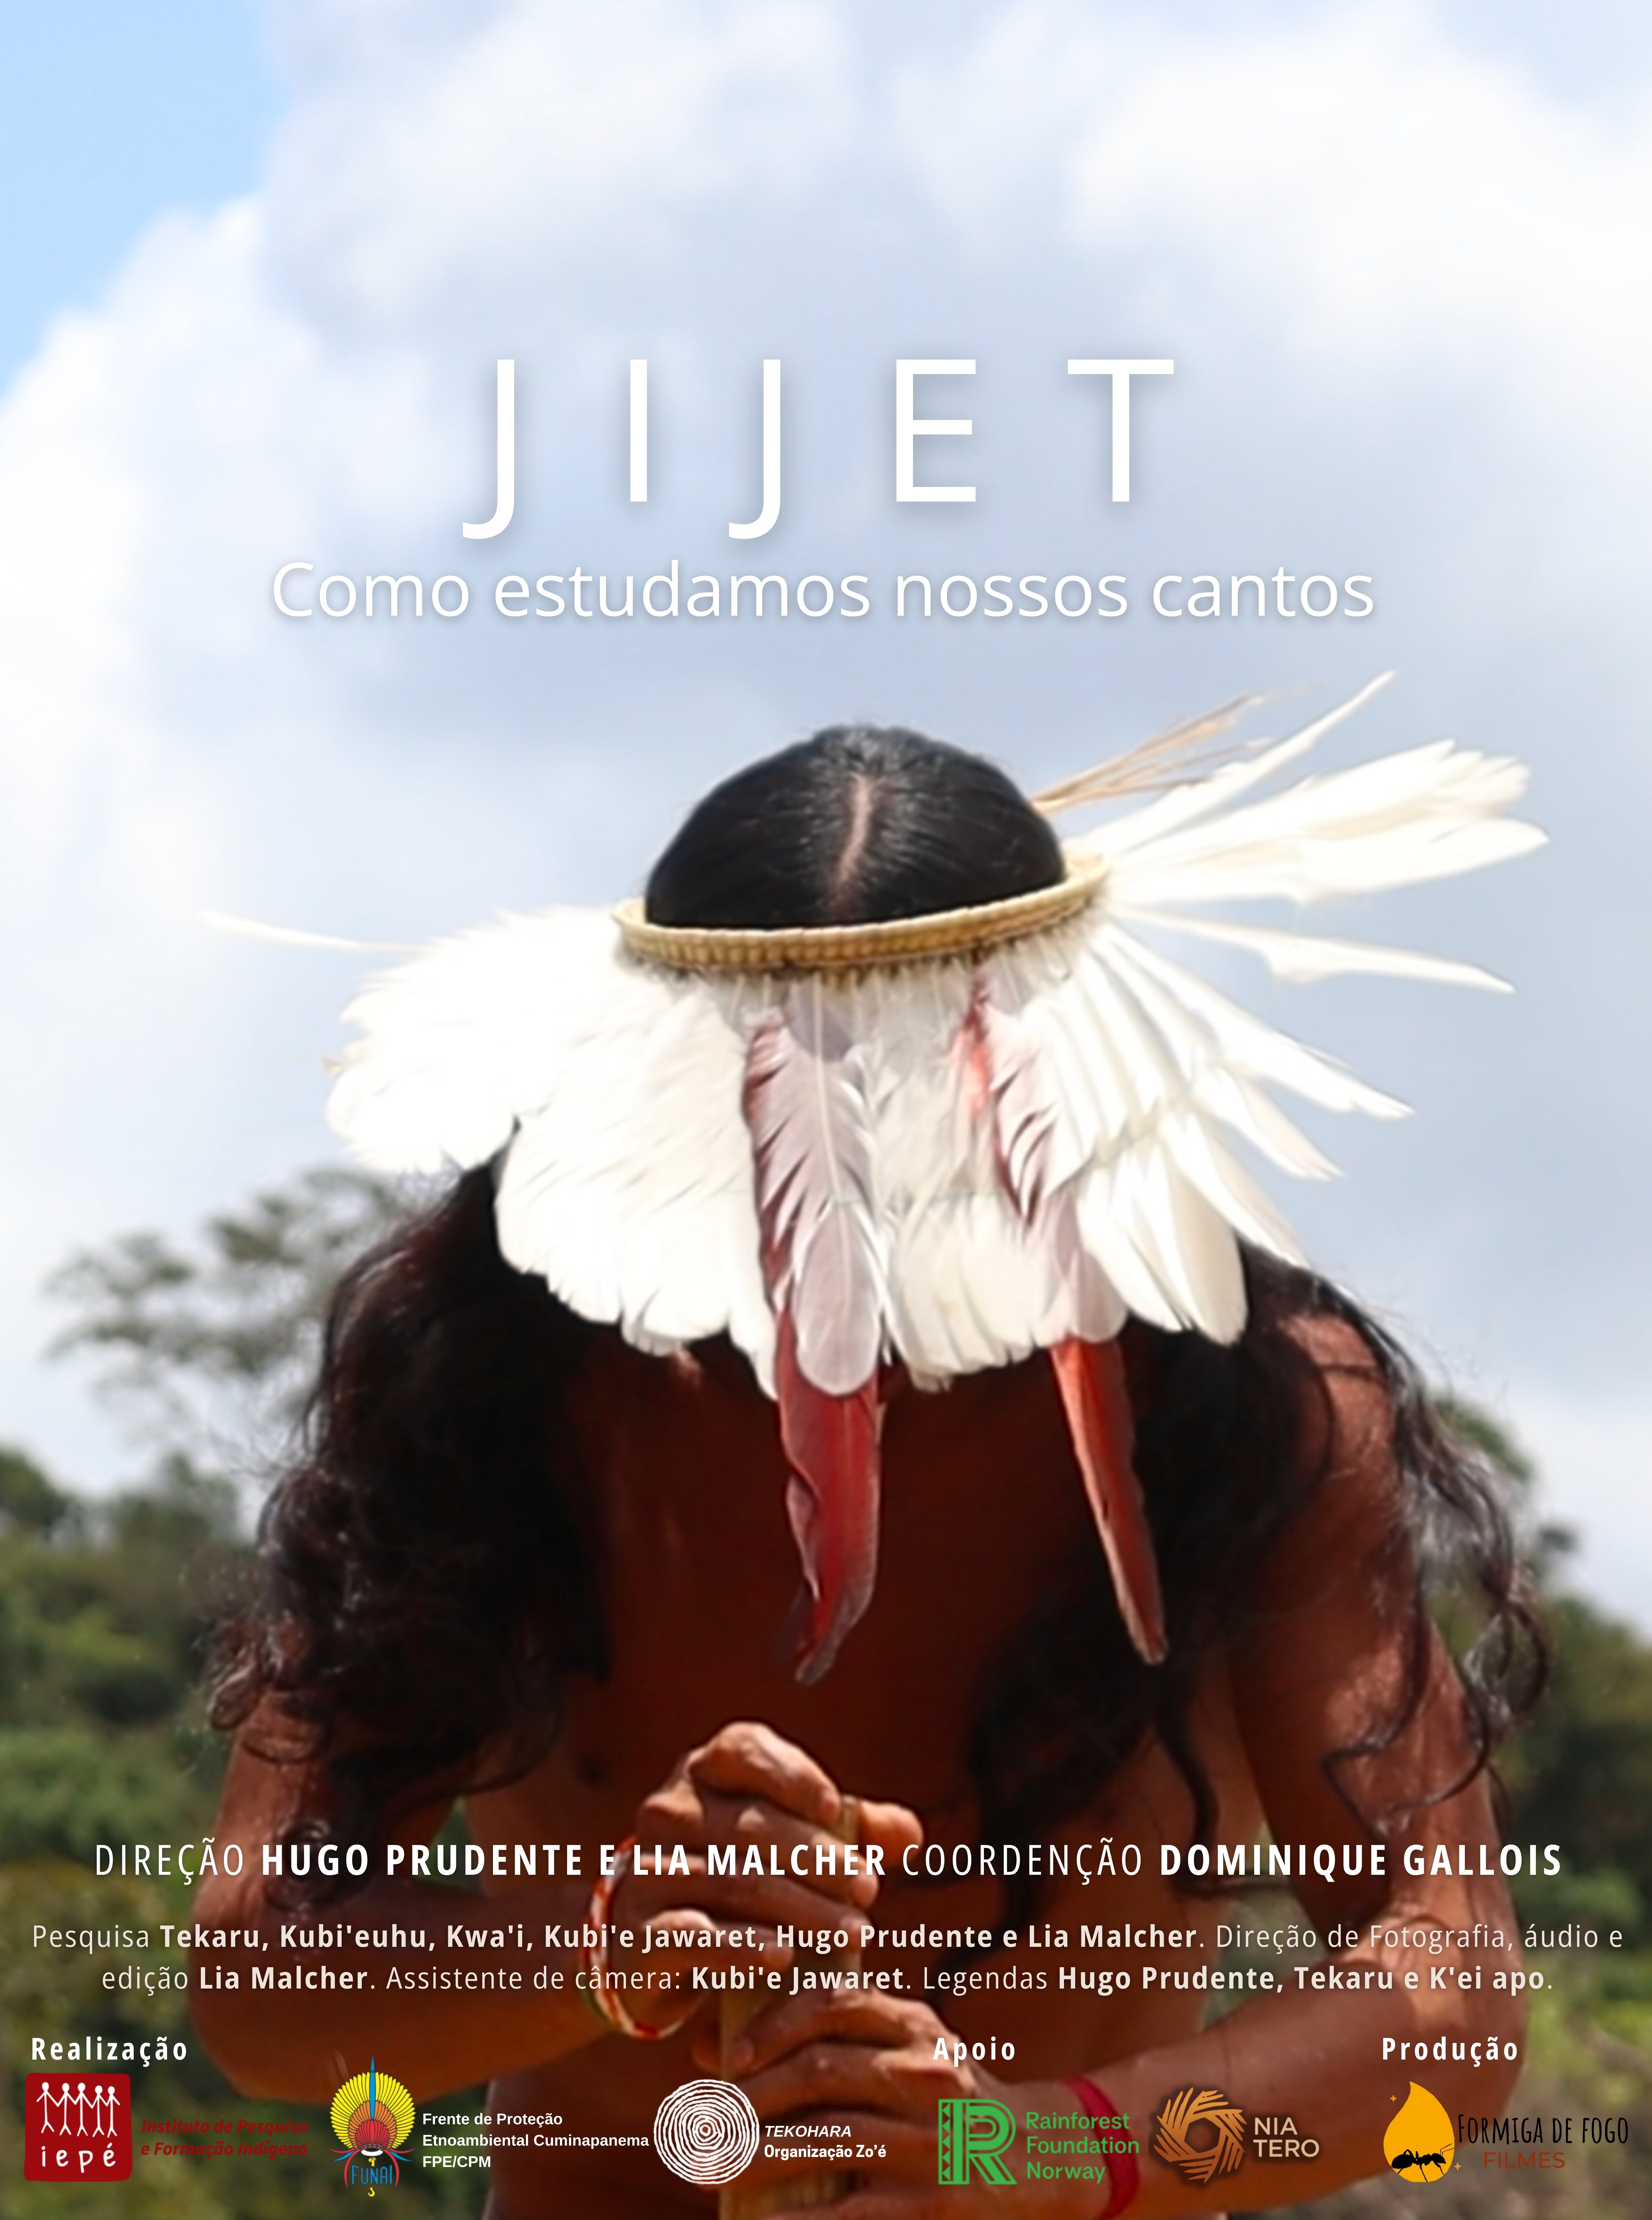 Launch of the film “Jijet: How we study our corners”